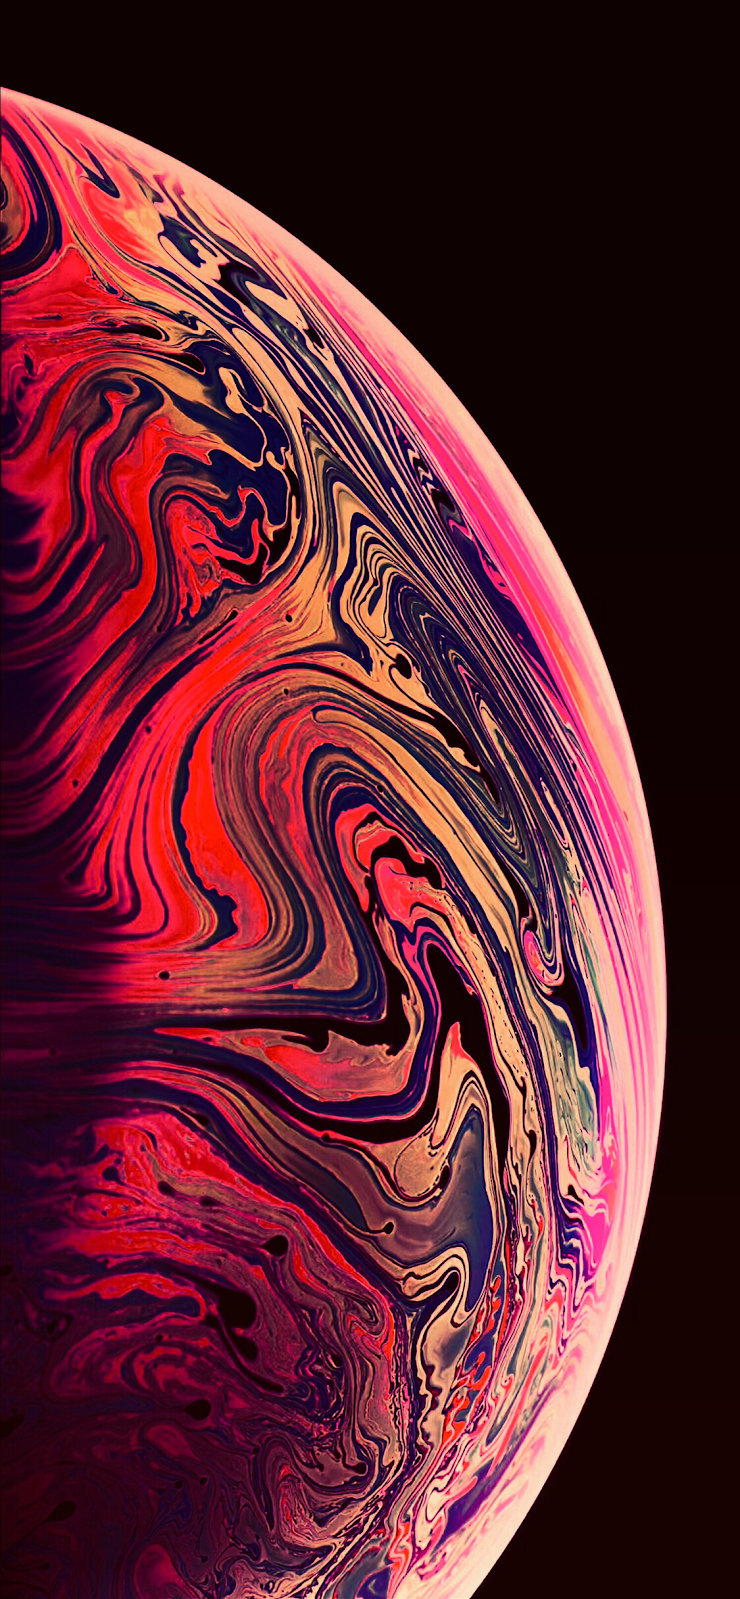 iPhone XS MAX Gradient Modd Wallpapers by AR72014 2 variants